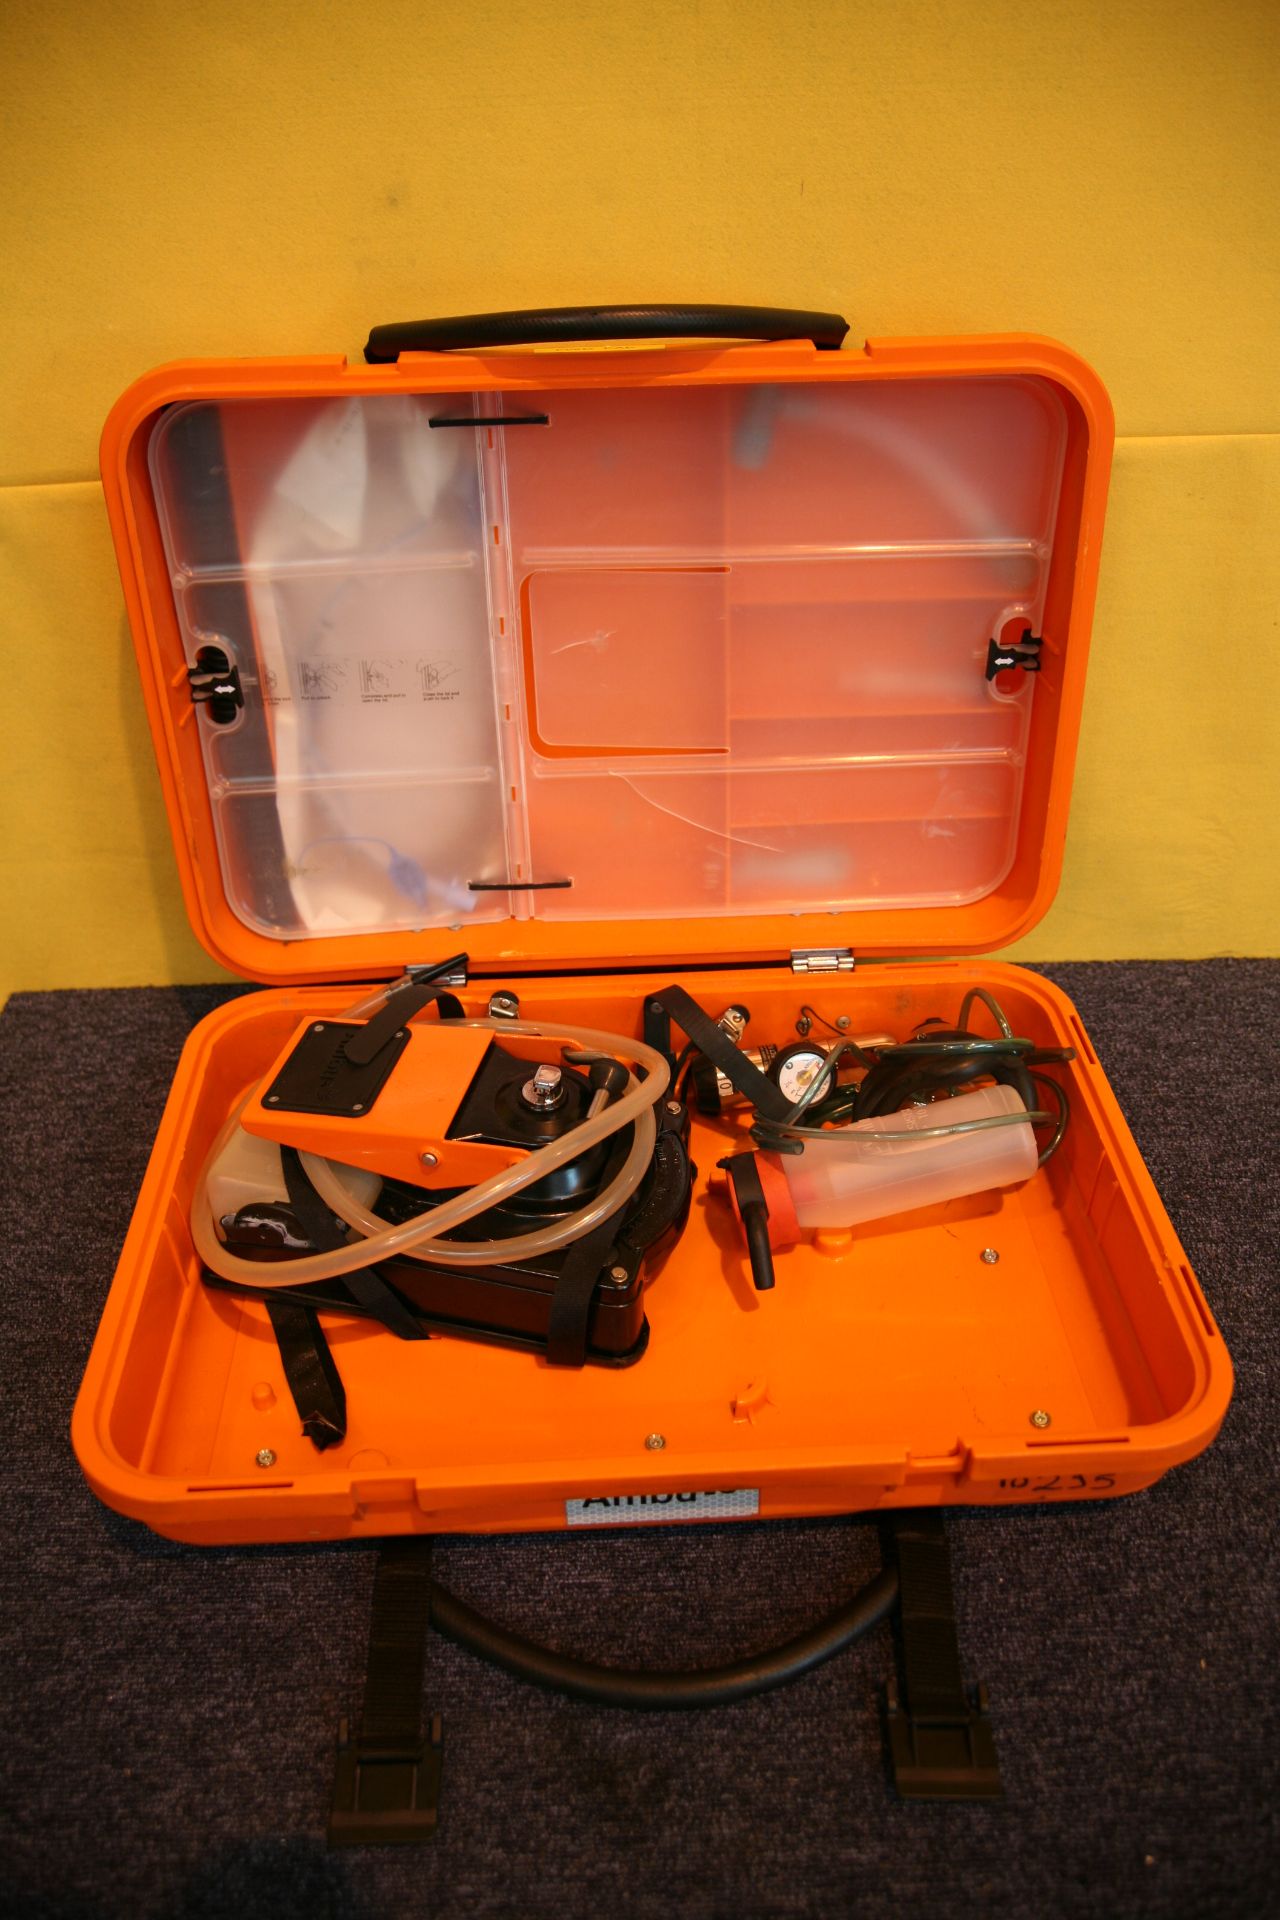 Ambu Resuscitation Kit In Case *Incomplete* (View Photo For Components) (10295)